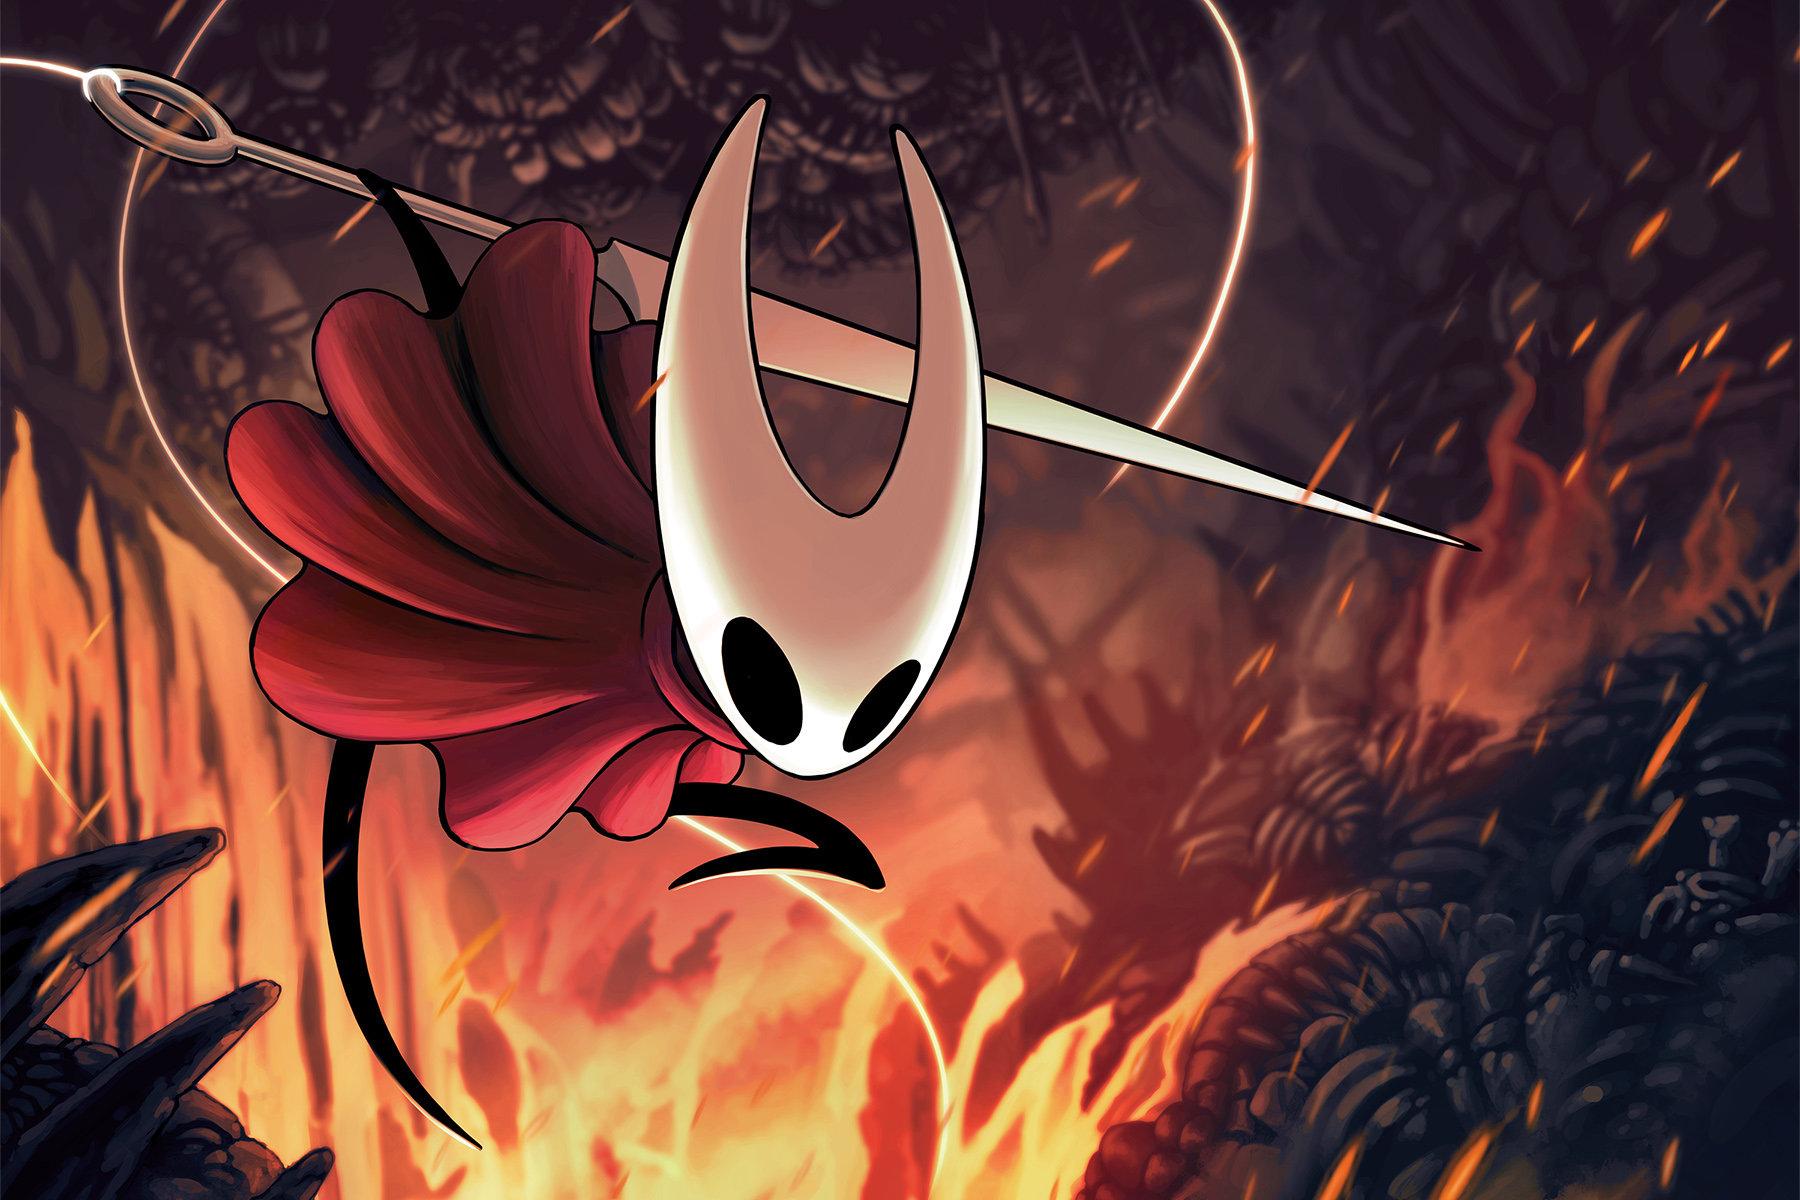 hollow knight silksong download free